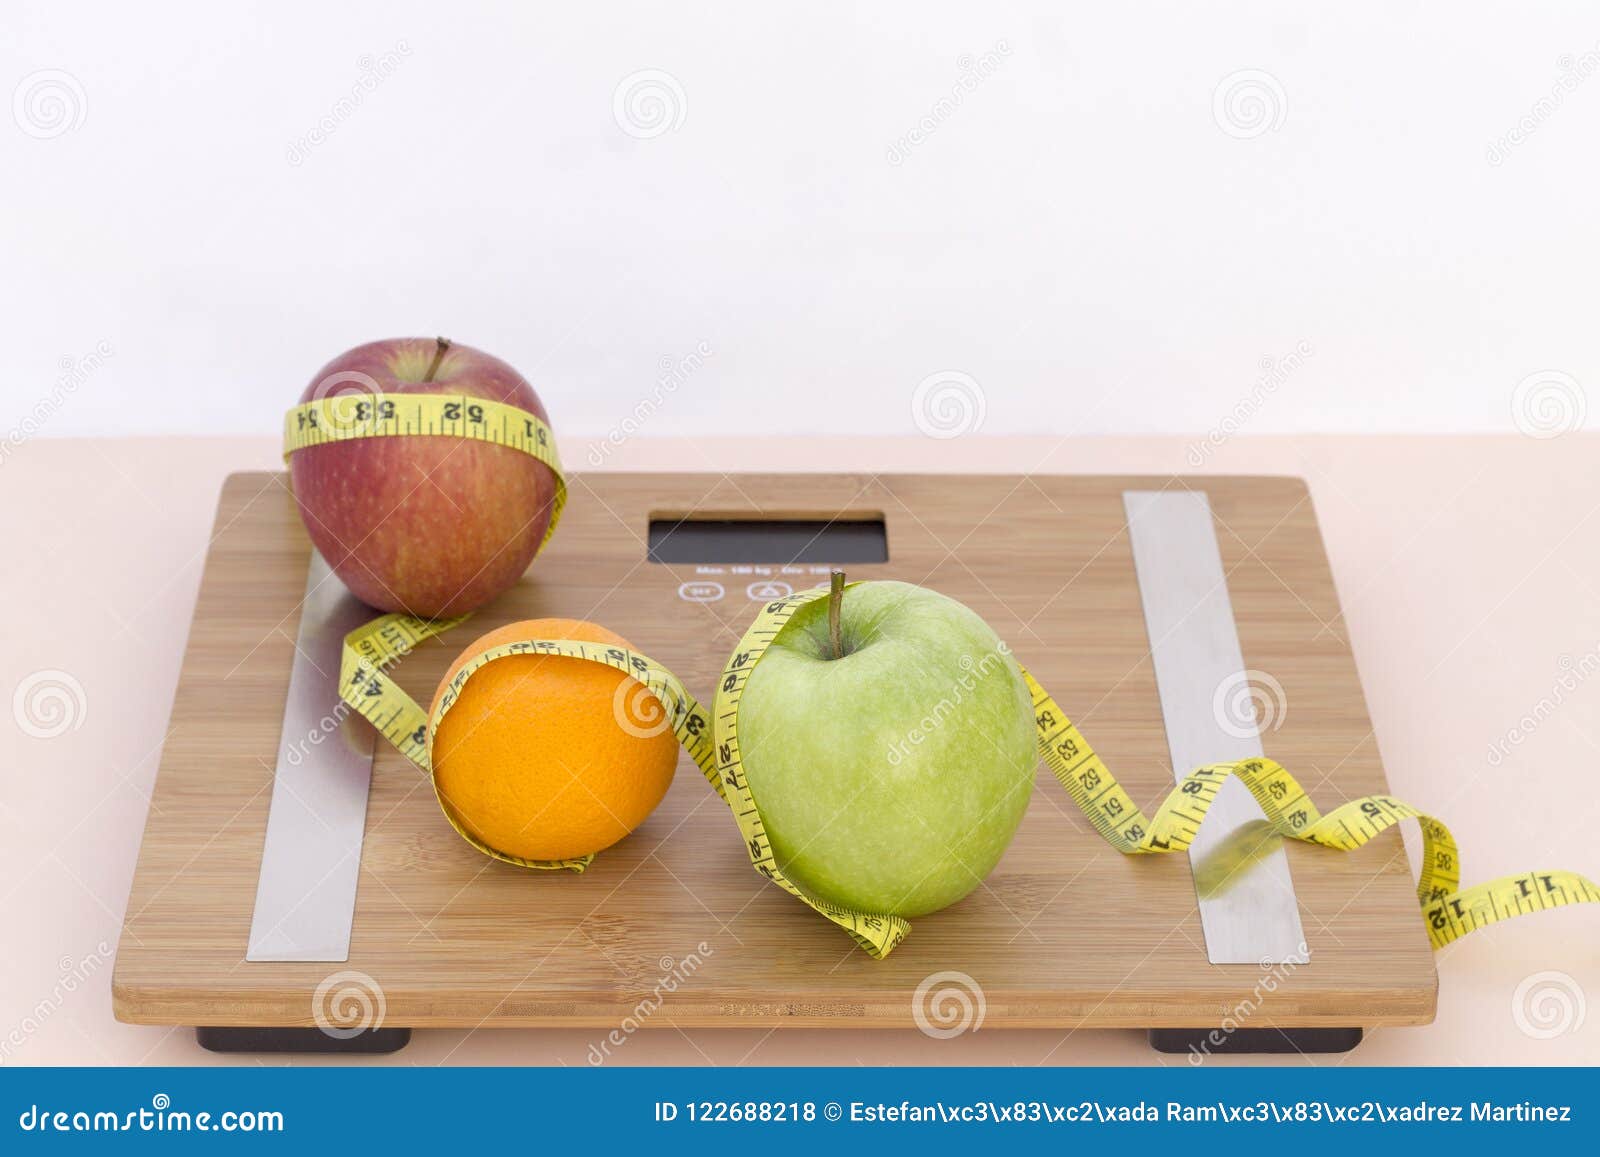 still life photography with fruits, tape mesaure and a scale